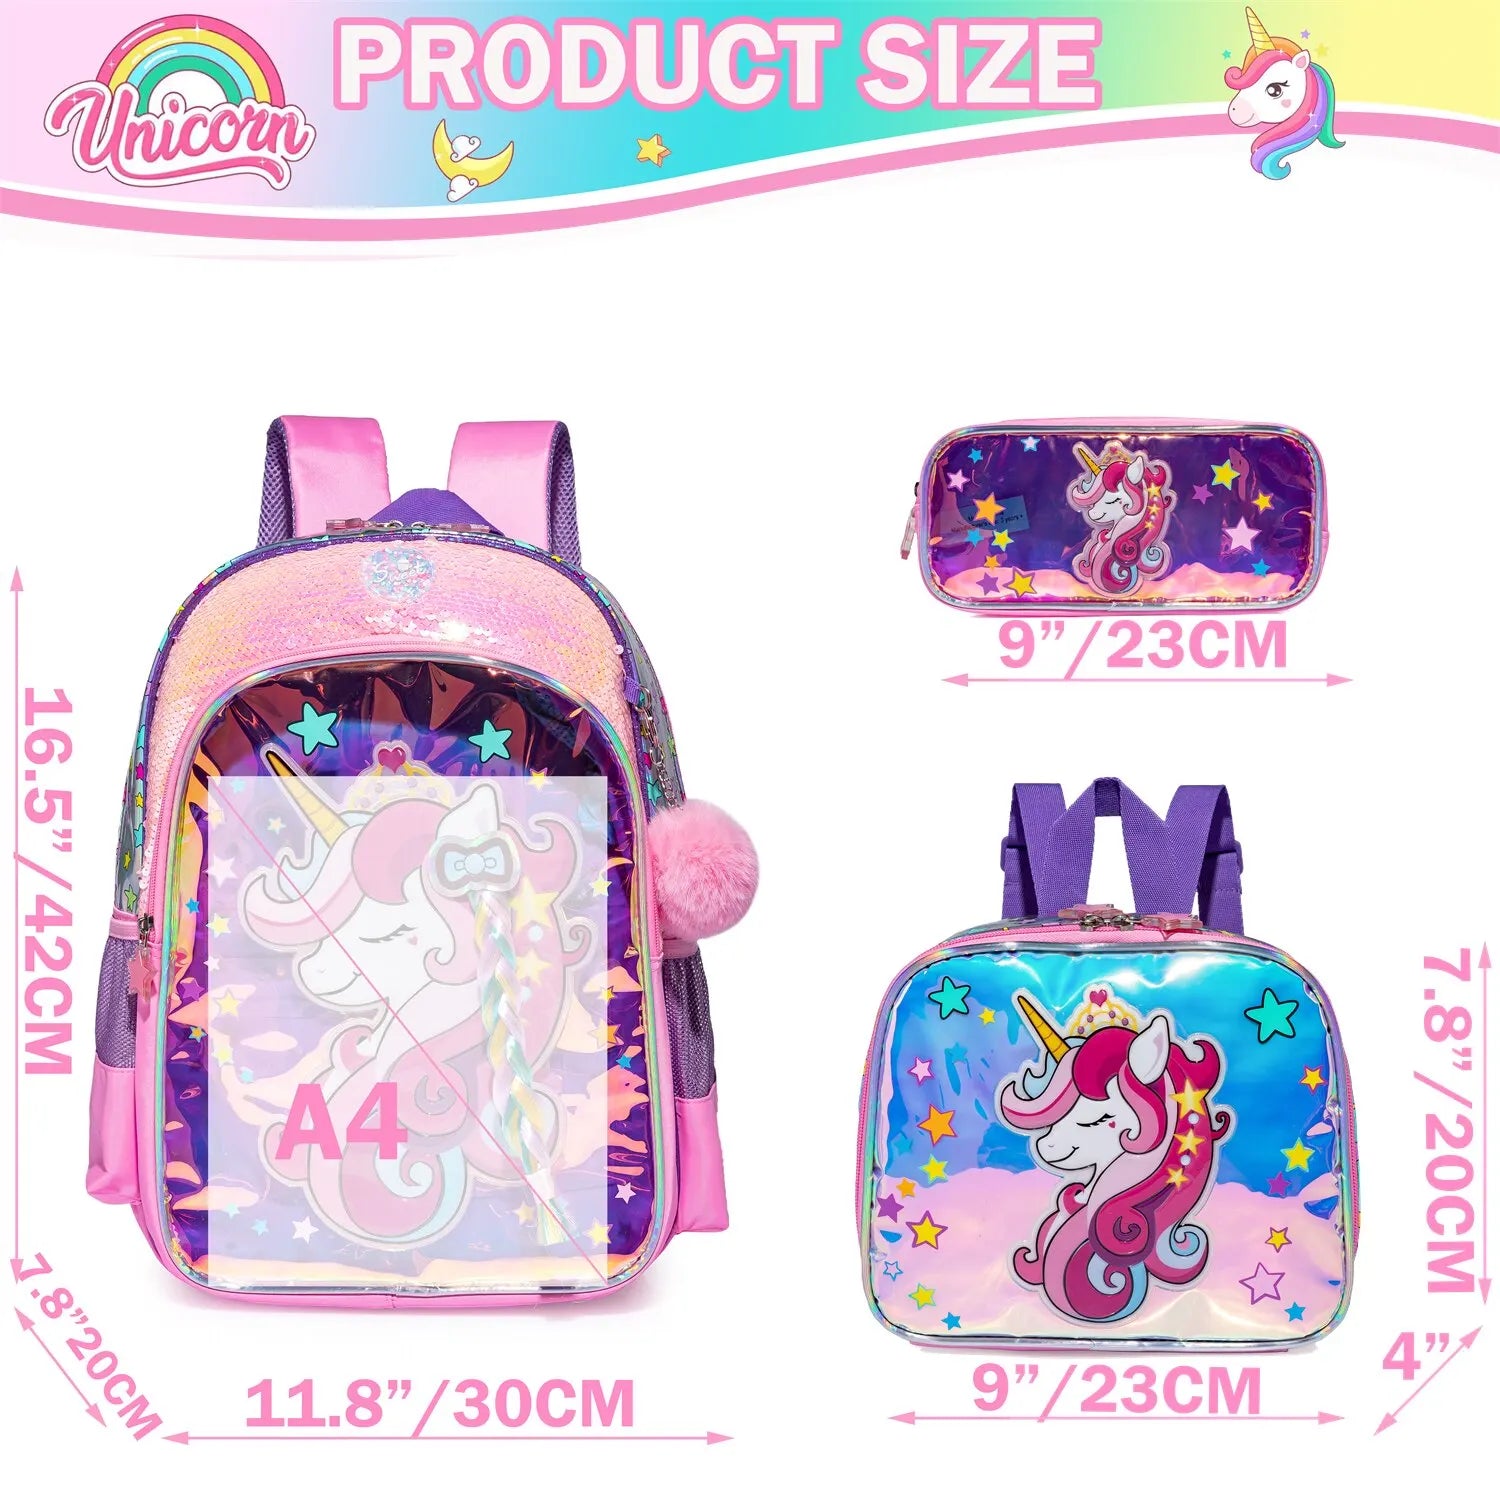 Magical Unicorn Fantasy Backpack and Lunch Box Set for Girls